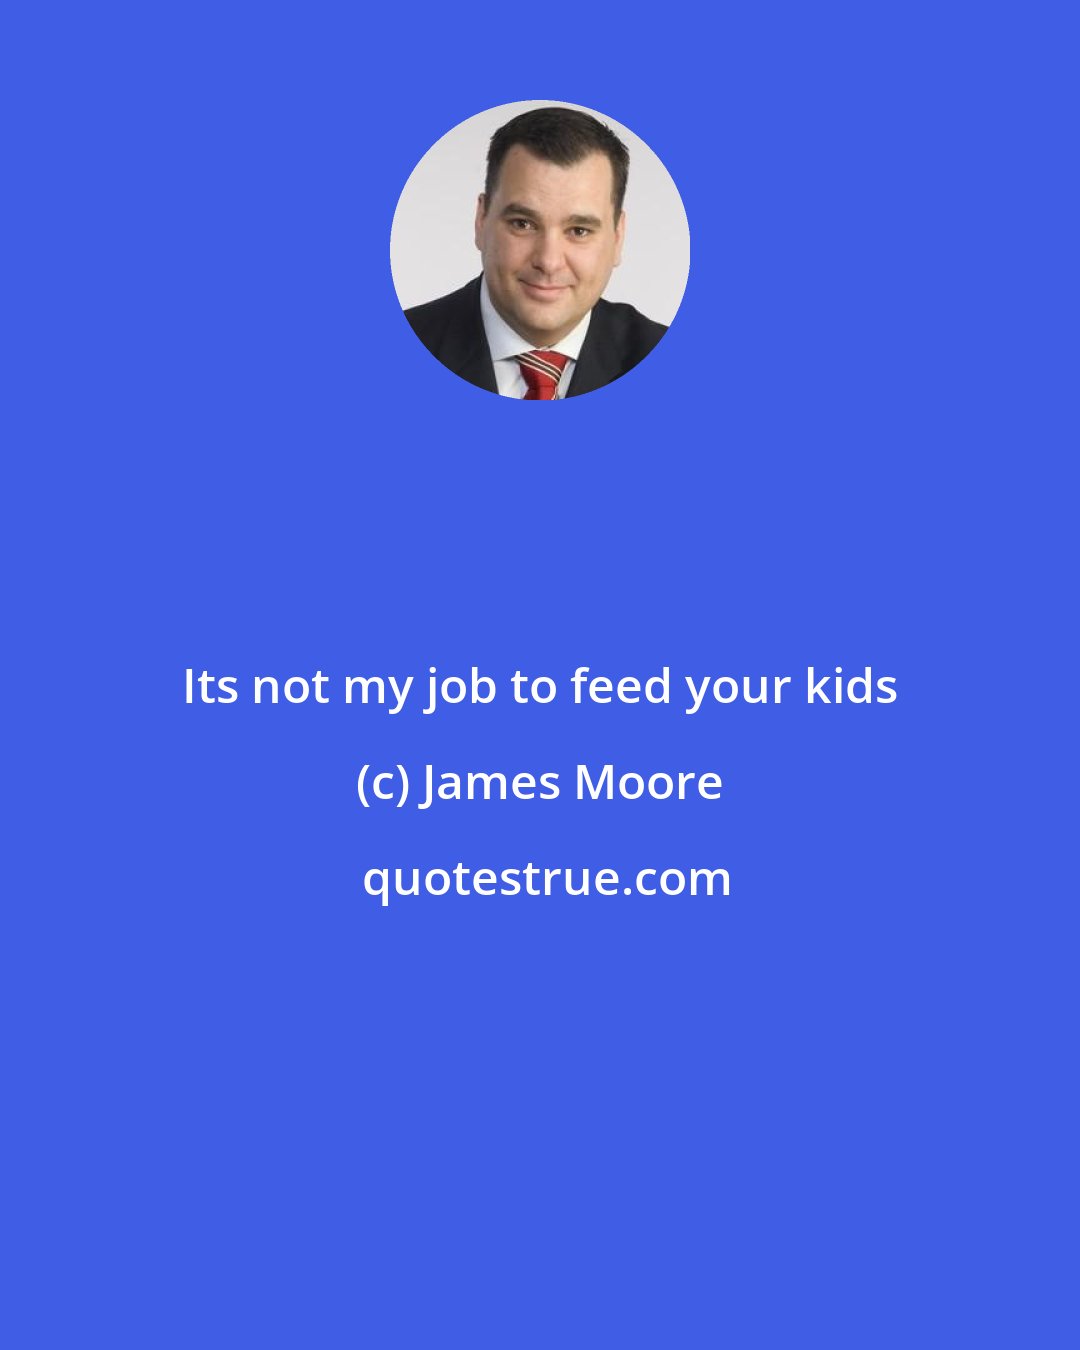 James Moore: Its not my job to feed your kids